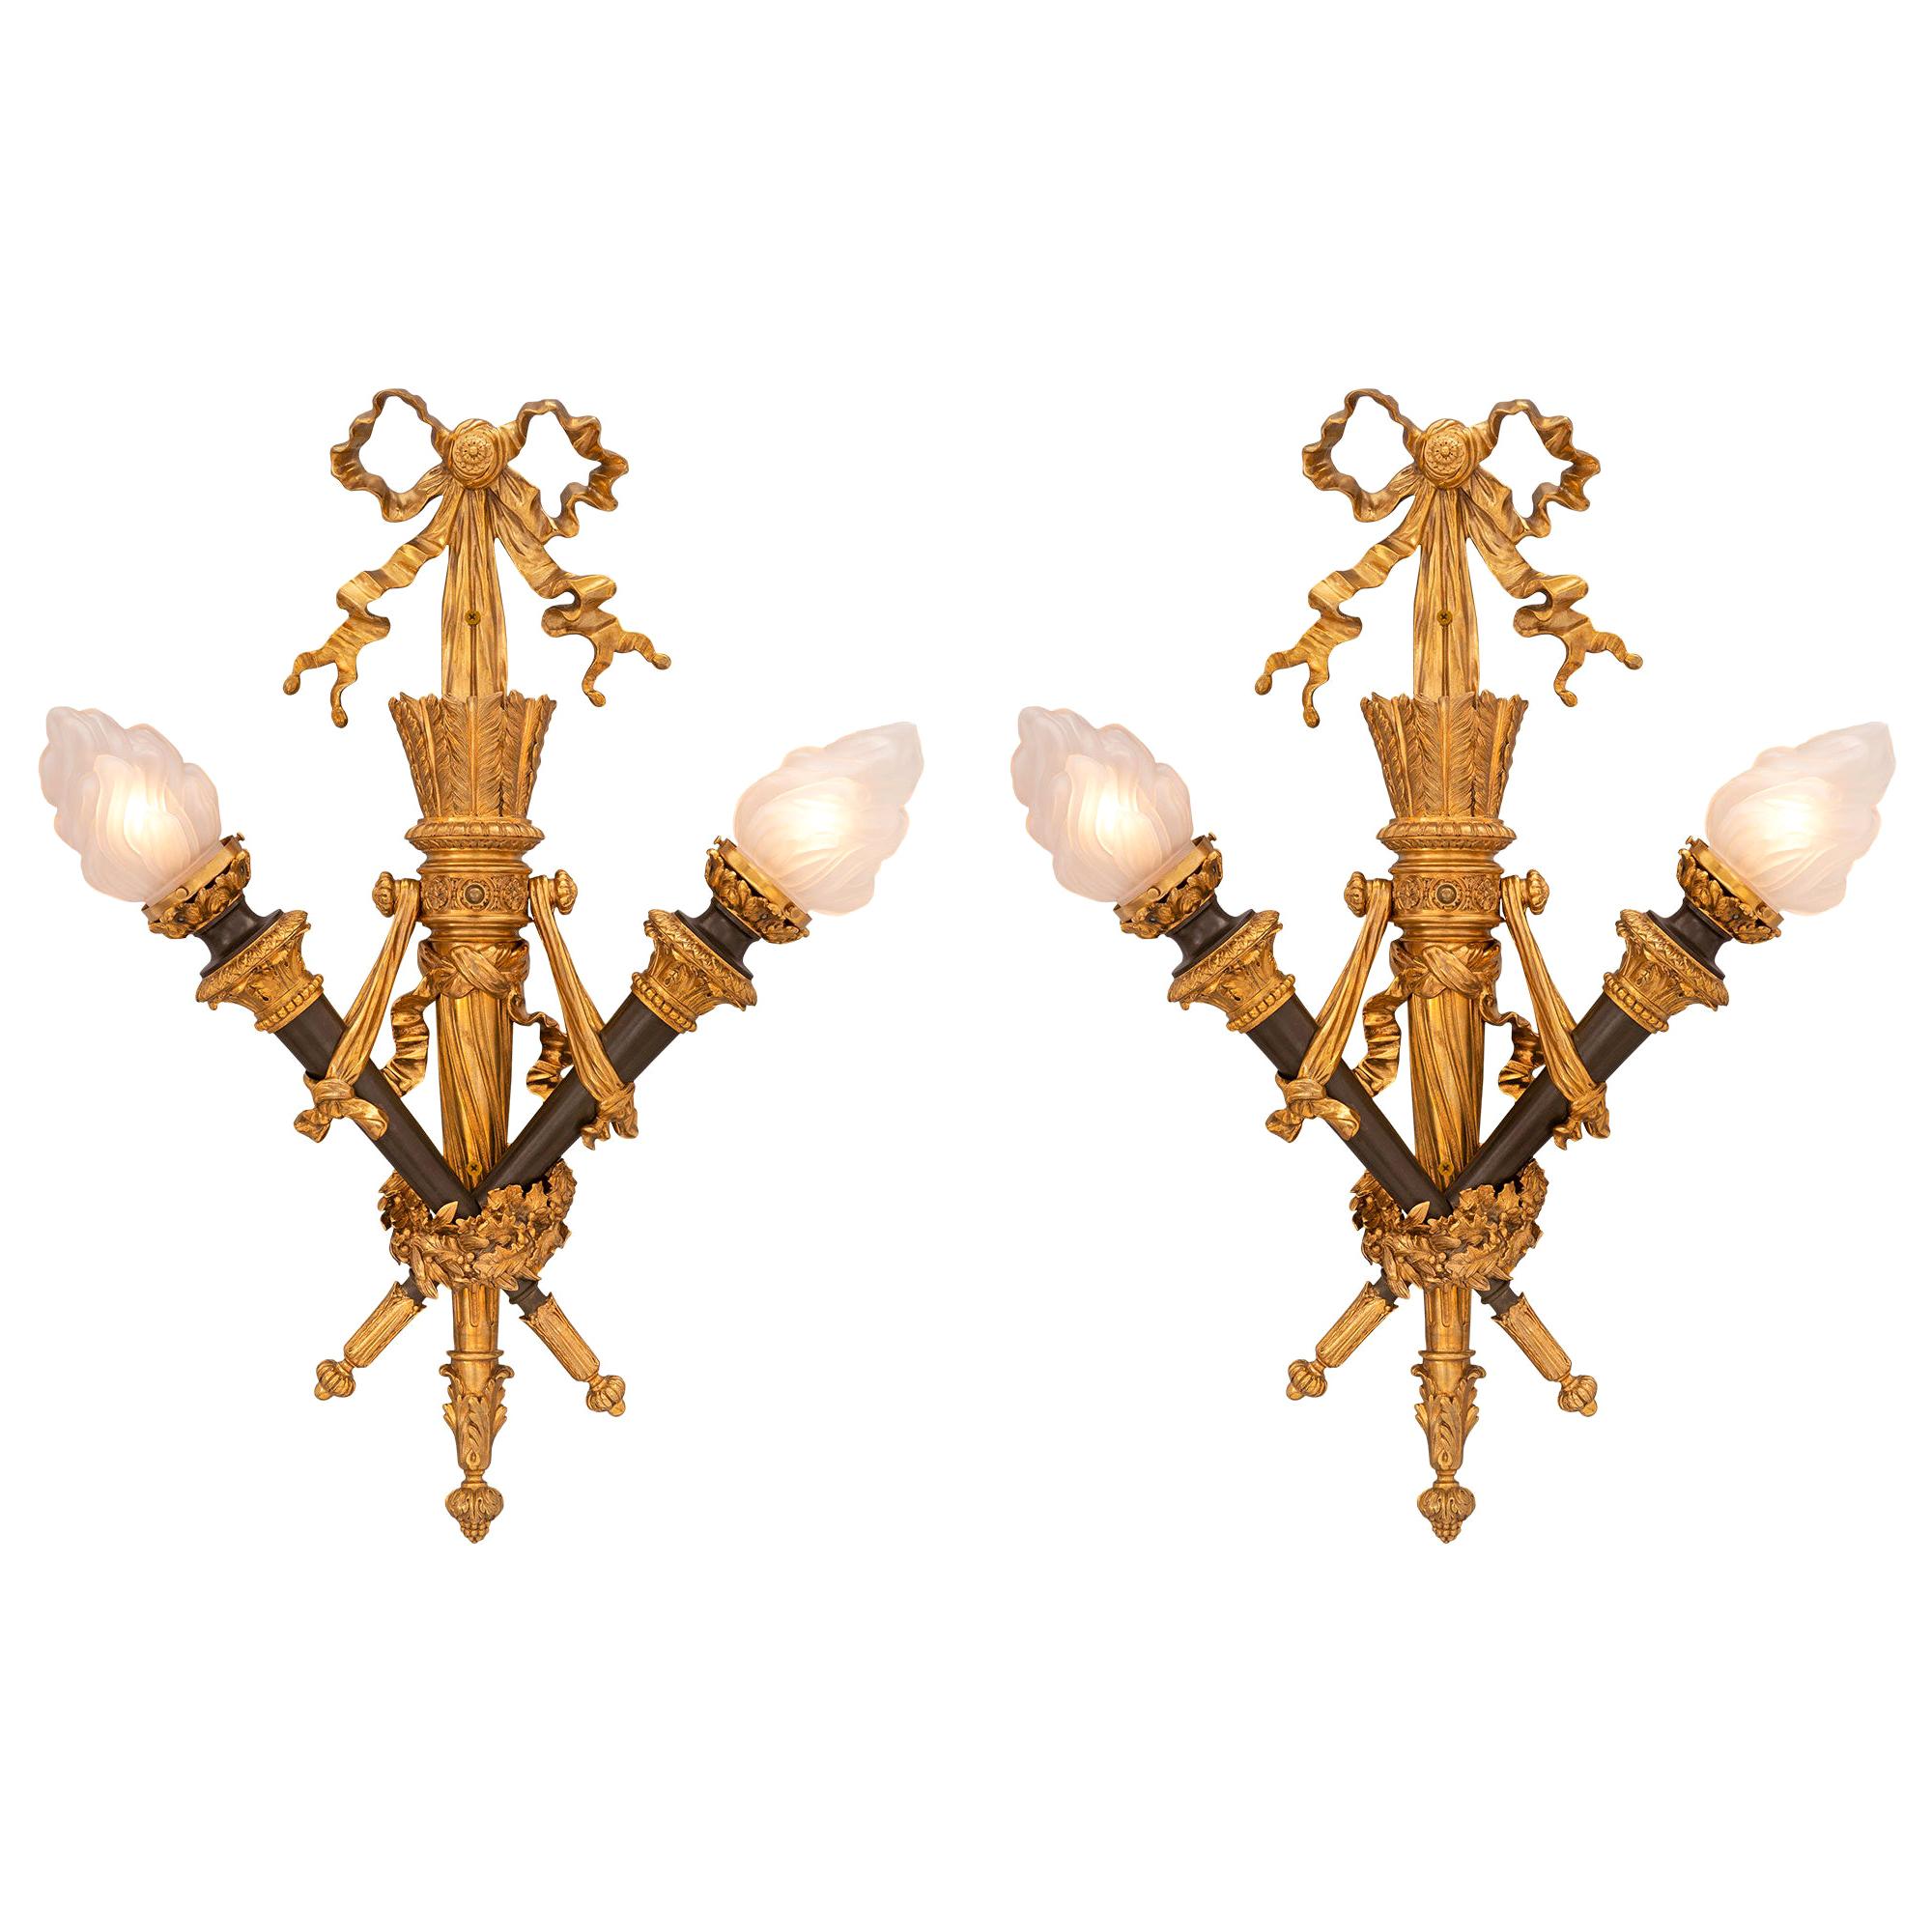 Pair of French 19th Century Louis XVI Style Ormolu and Patinated Bronze Sconces For Sale